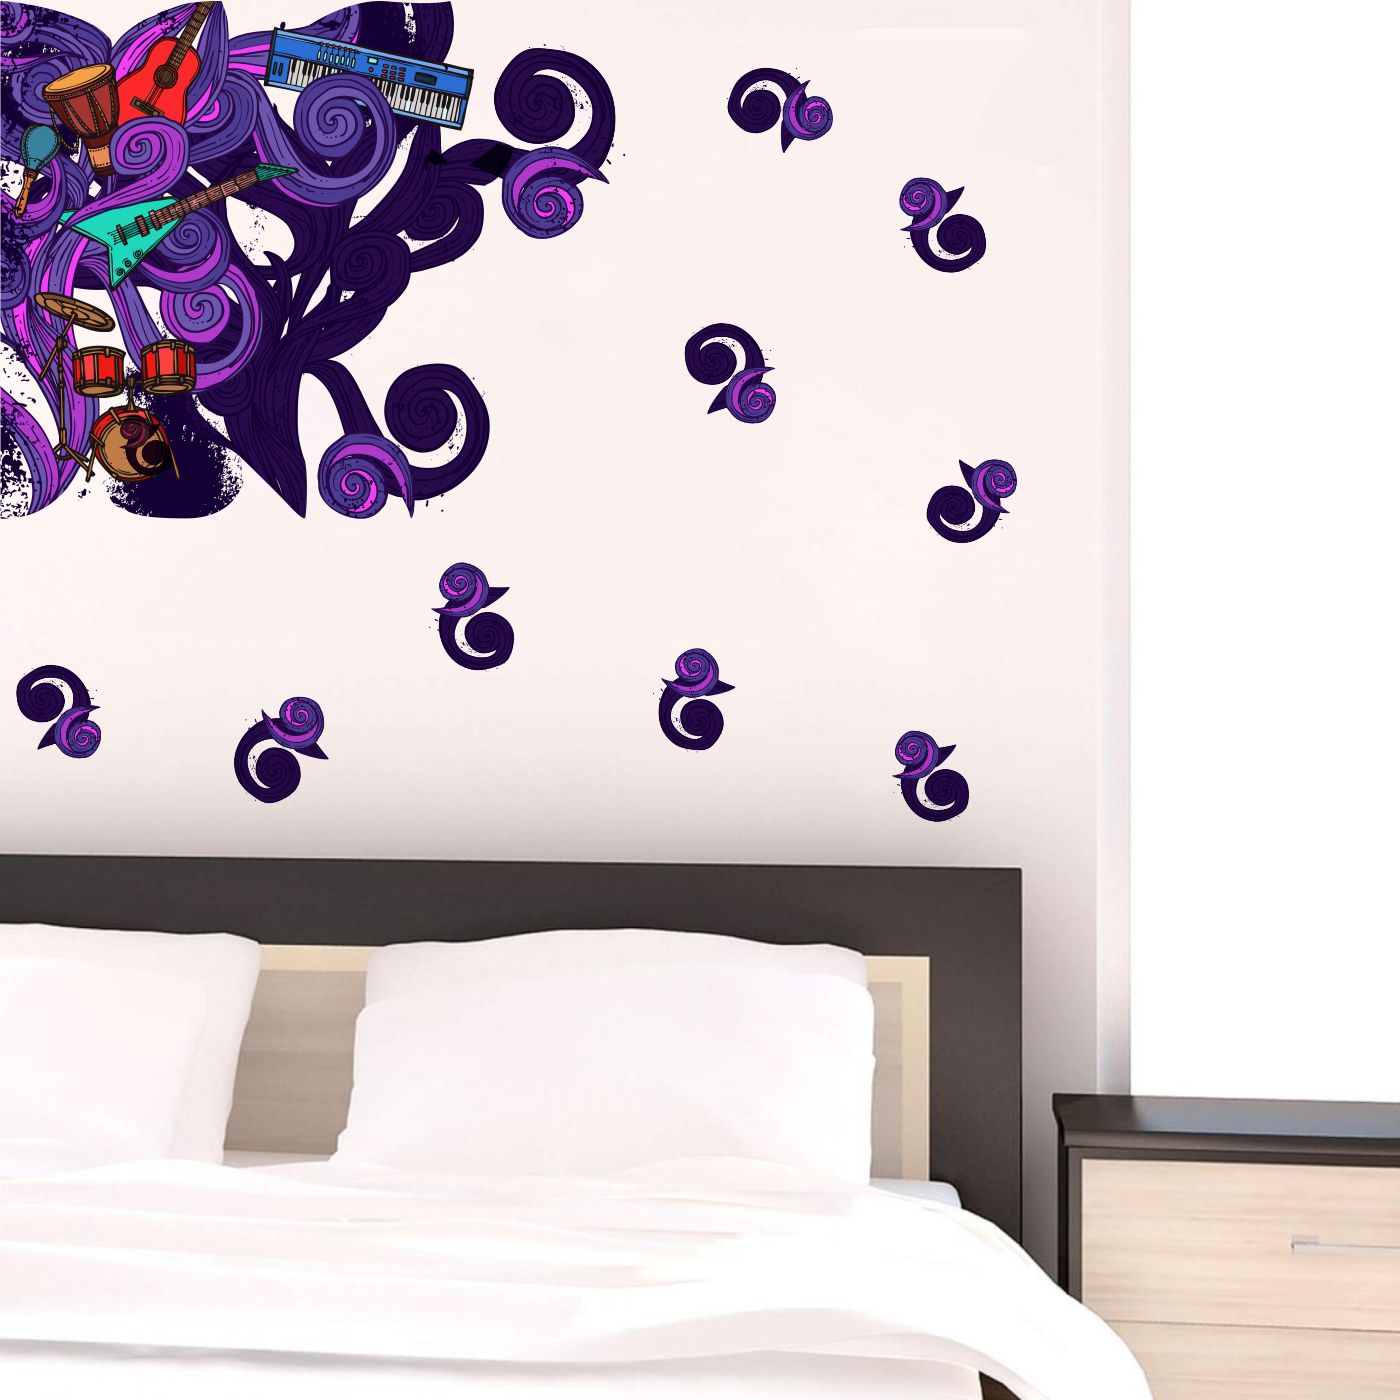 ORKA Quotes Wall Sticker 8  